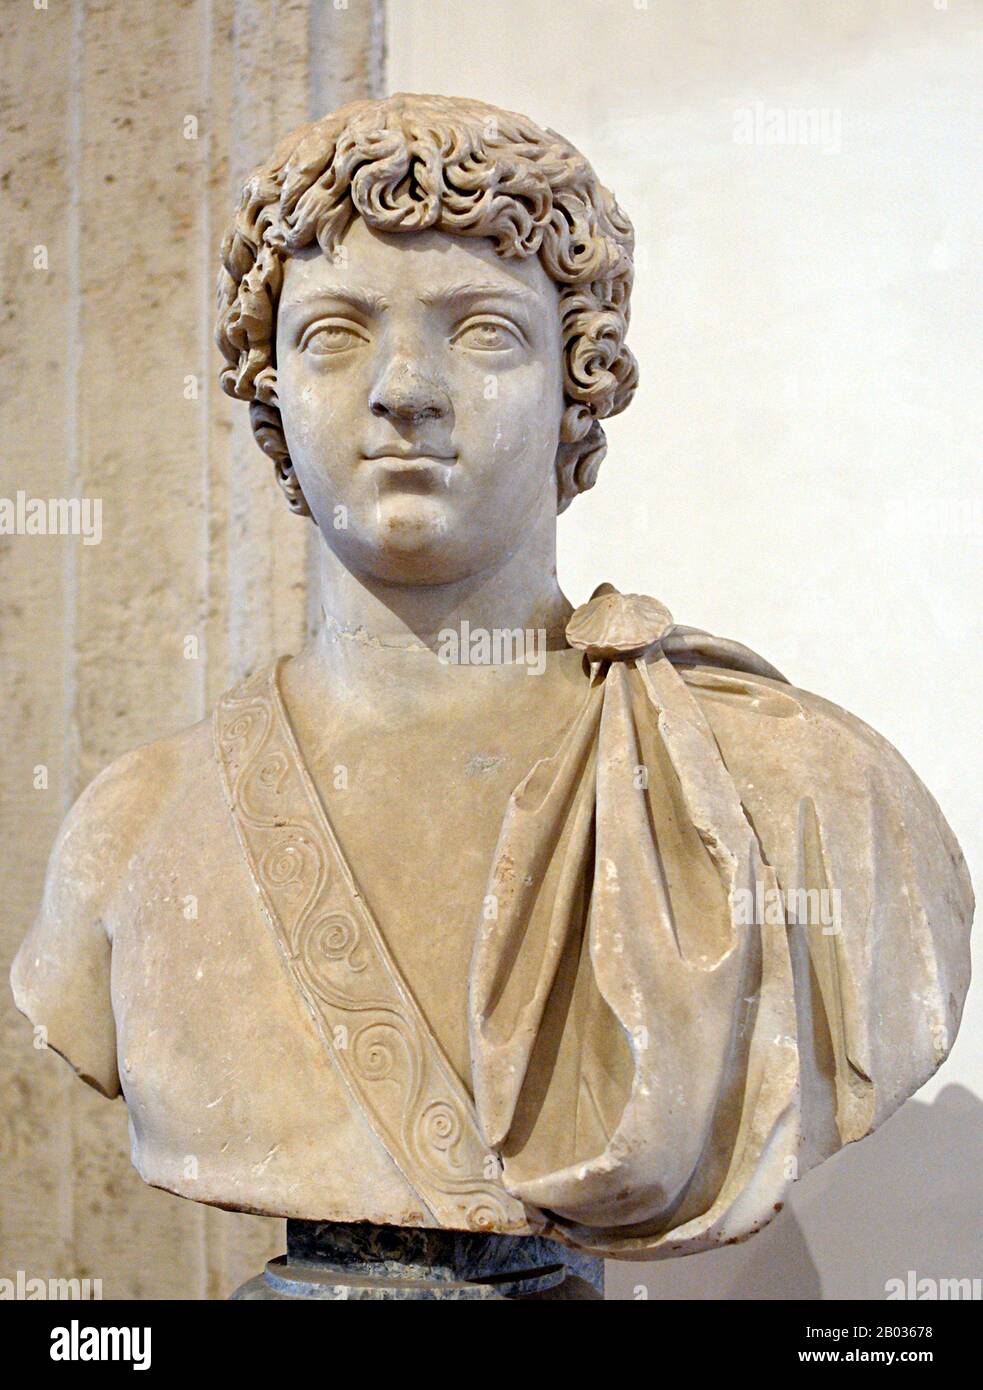 Born as Lucius Septimius Bassianus (188-217 CE) but renamed Marcus Aurelius Antoninus after his father's union with the families of the Nerva-Antonine dynasty, he gained his agnomen Caracalla from a Gallic hooded tunic which he often wore. Eldest son of Emperor Septimius Severus, he reigned jointly with his father from 198 CE until his father's death in 211 CE. He then became joint emperor with his younger brother Geta, but he quickly murdered his brother less than a year into their joint rule.  Caracalla's reign was marked by continued assaults from the Germanic peoples as well as constant do Stock Photo